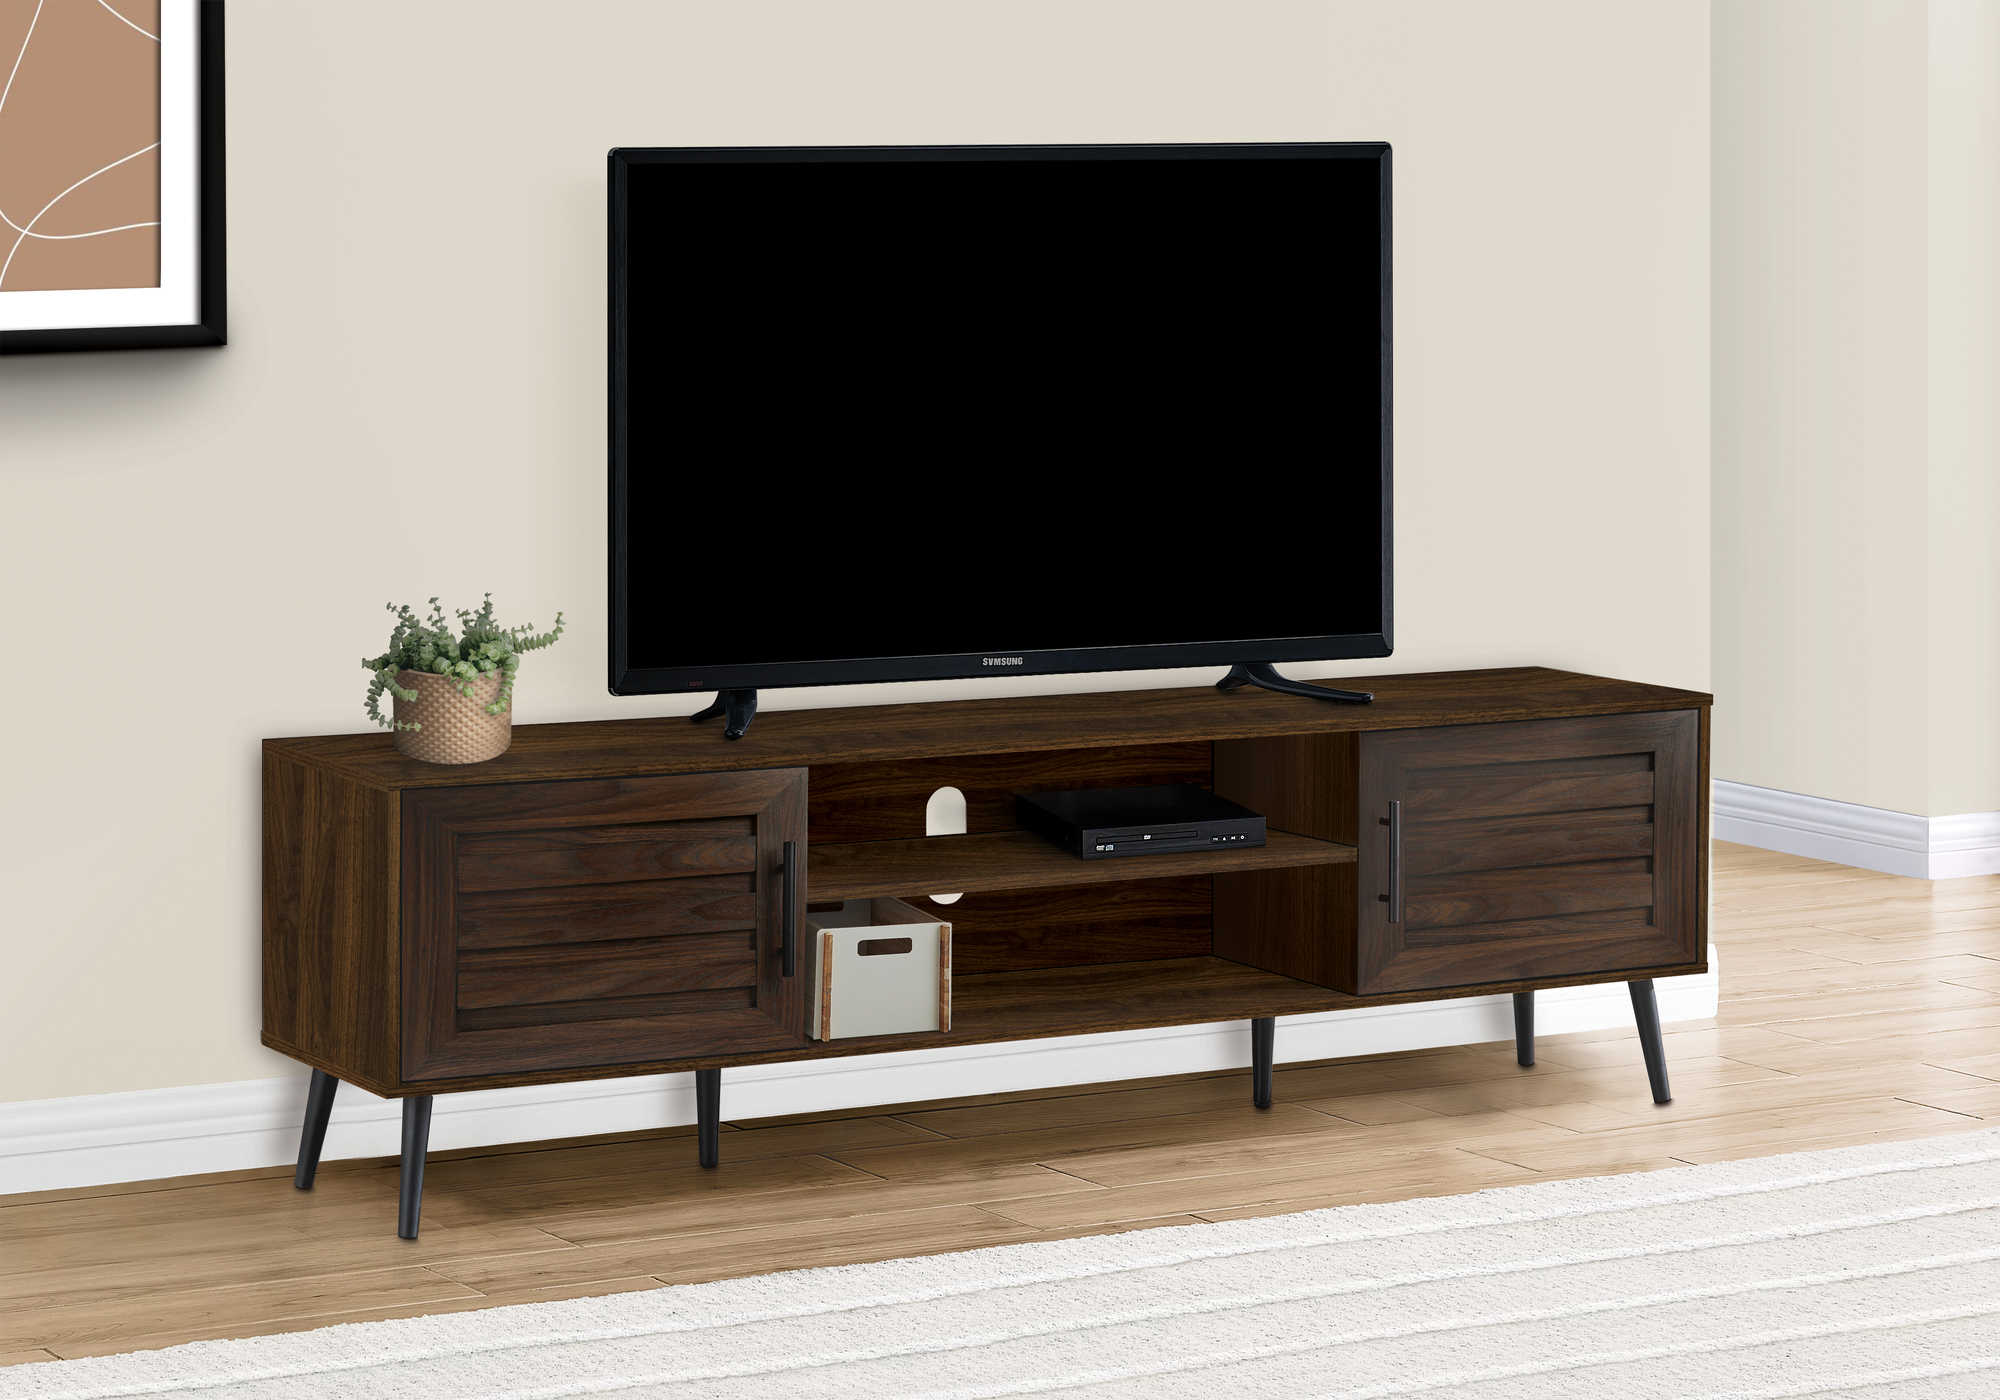 TV STAND - 72"L / BROWN WOOD-LOOK WITH 2 DOORS 